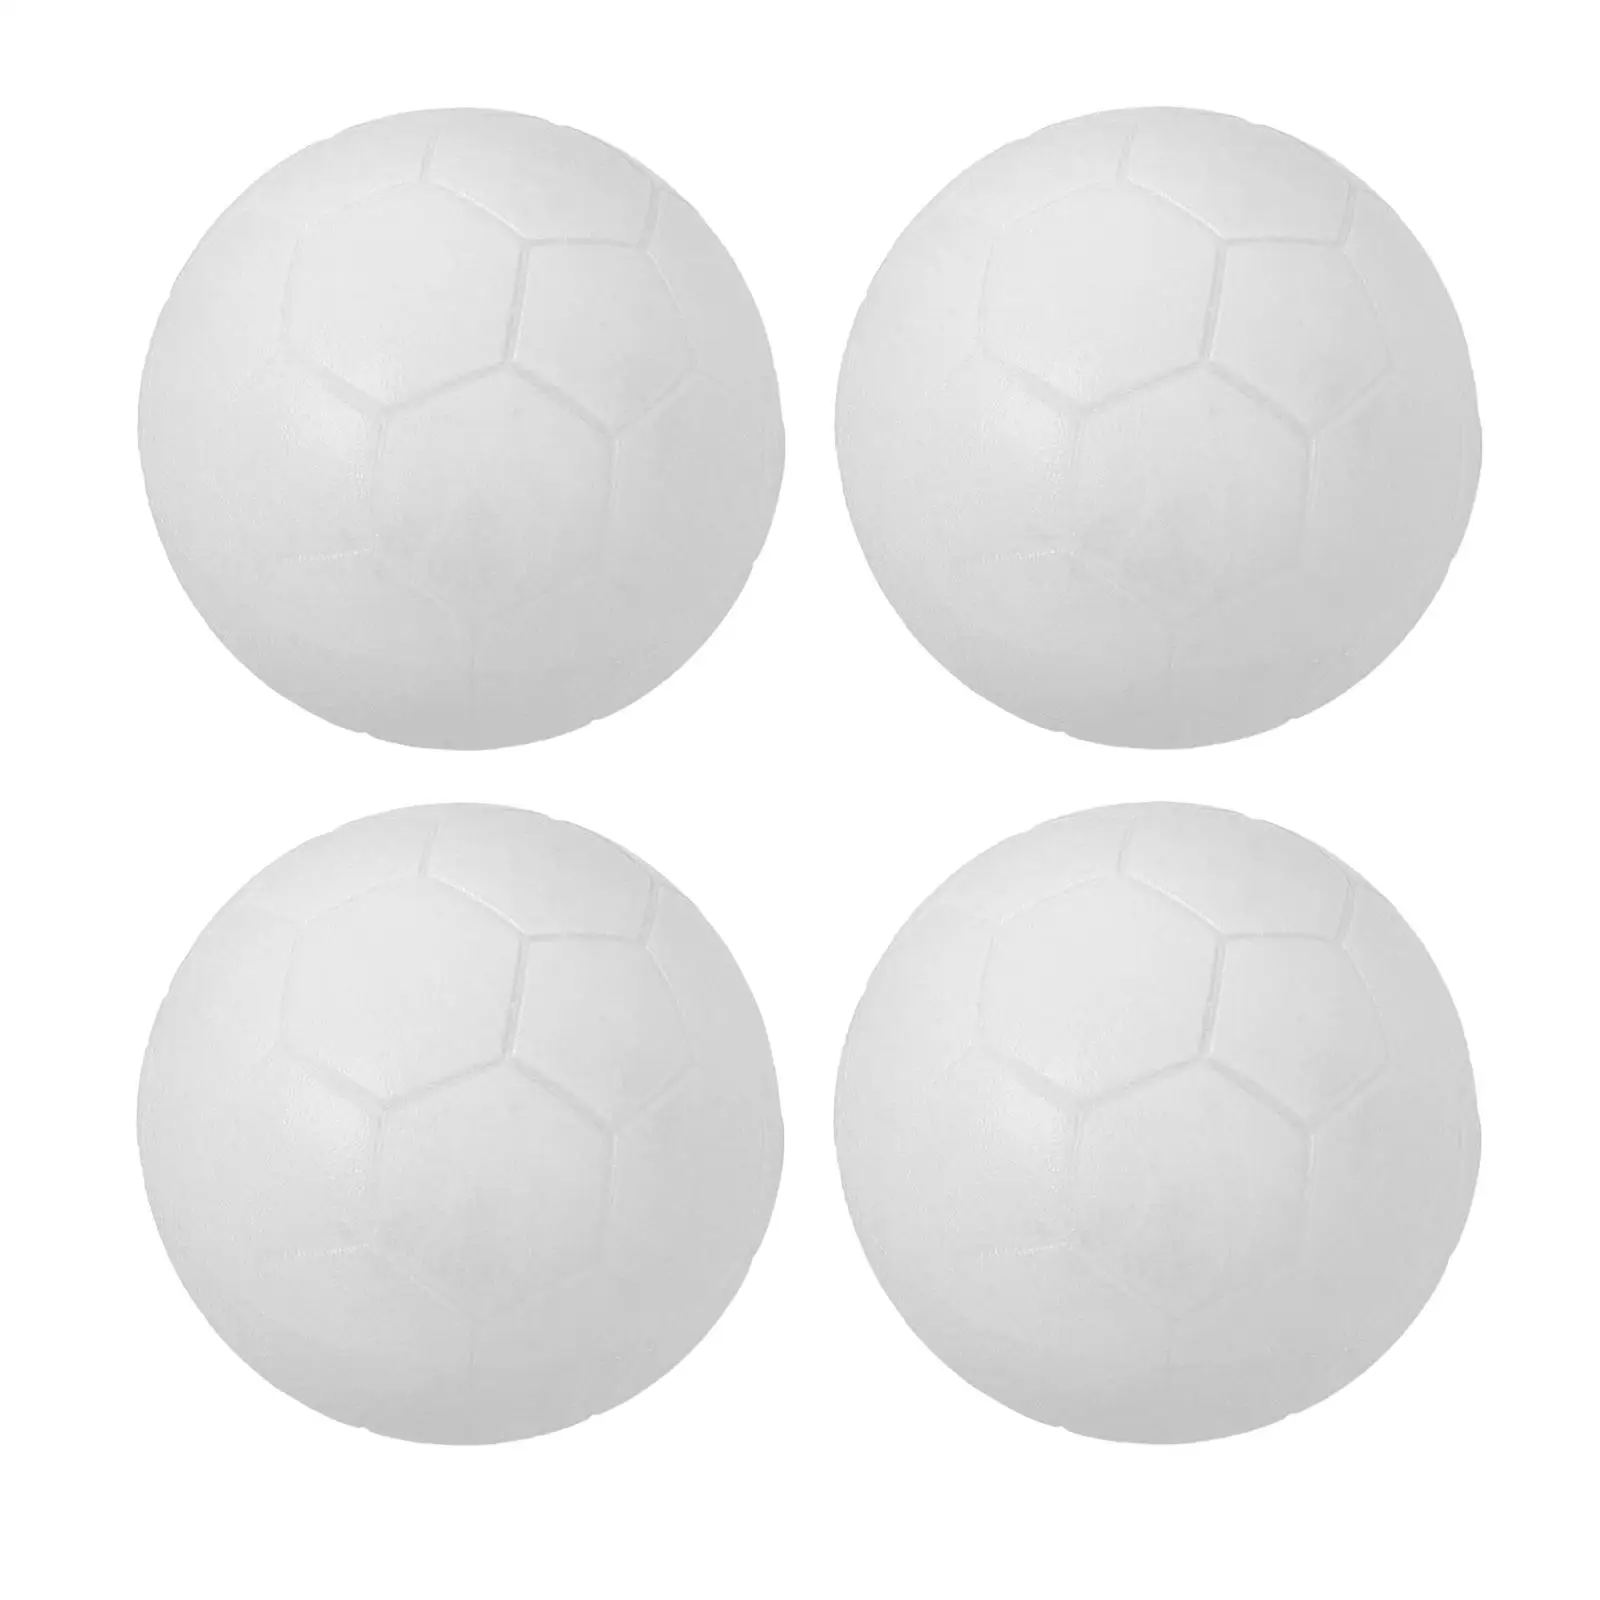 4Pcs Durable Table Soccer Balls 36mm Foosball Balls Solid White Tabletop Game PP